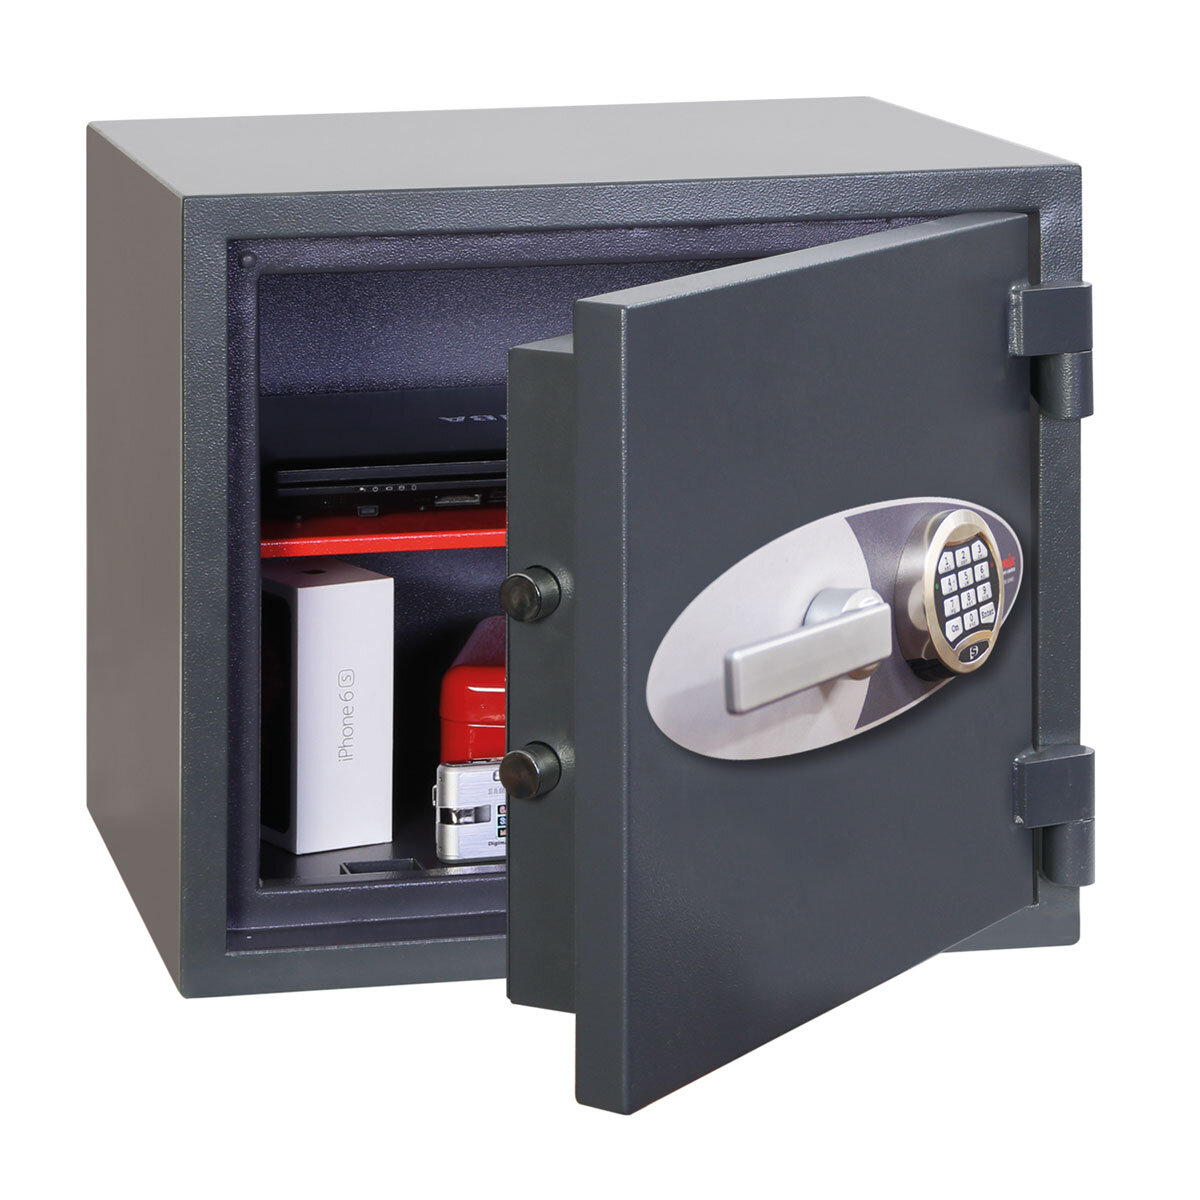 Cut out image of safe with door partially open